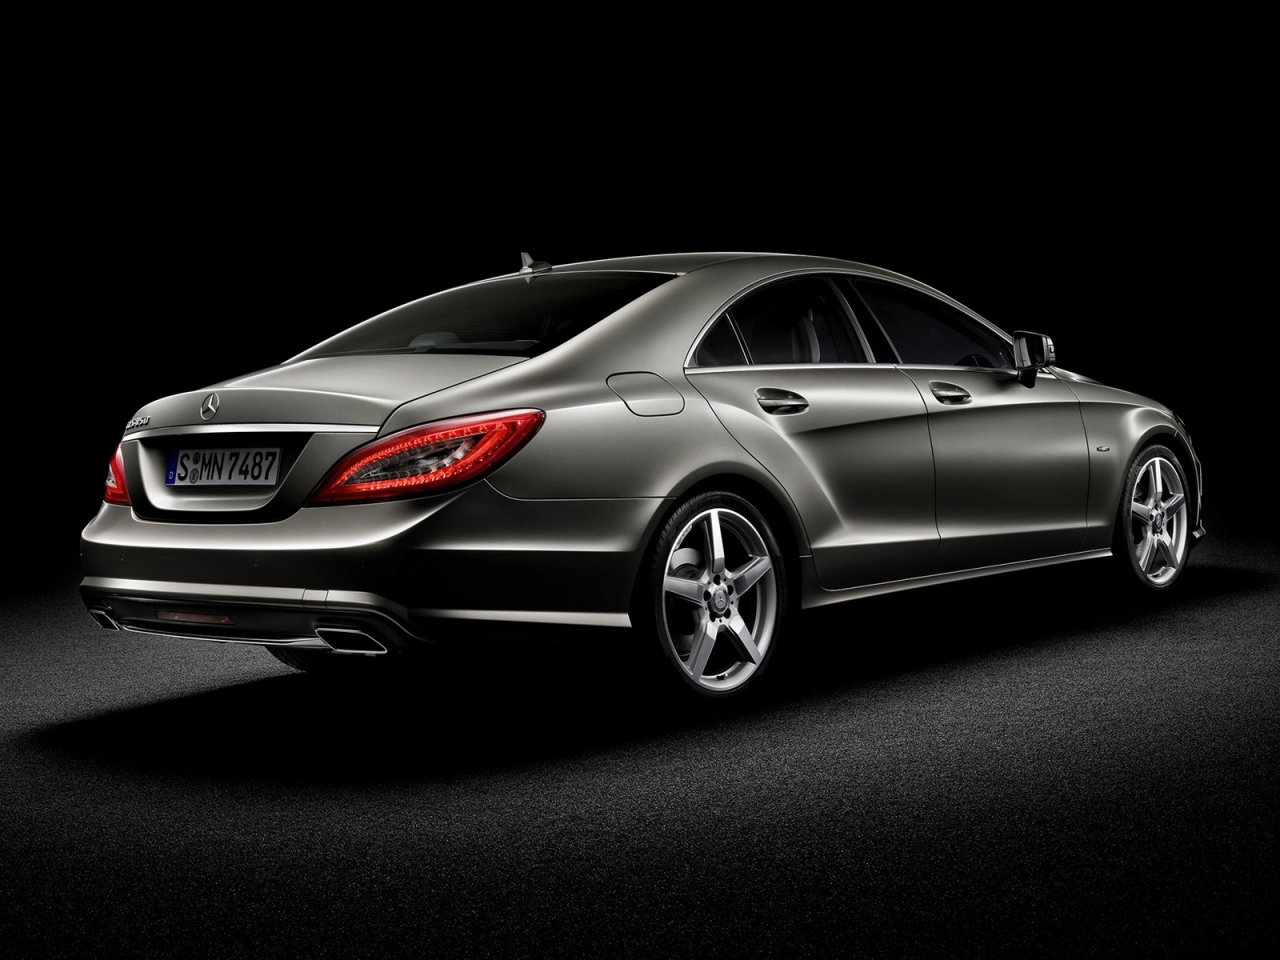 Mercedes CLS 2010 Rear for 1280 x 960 resolution